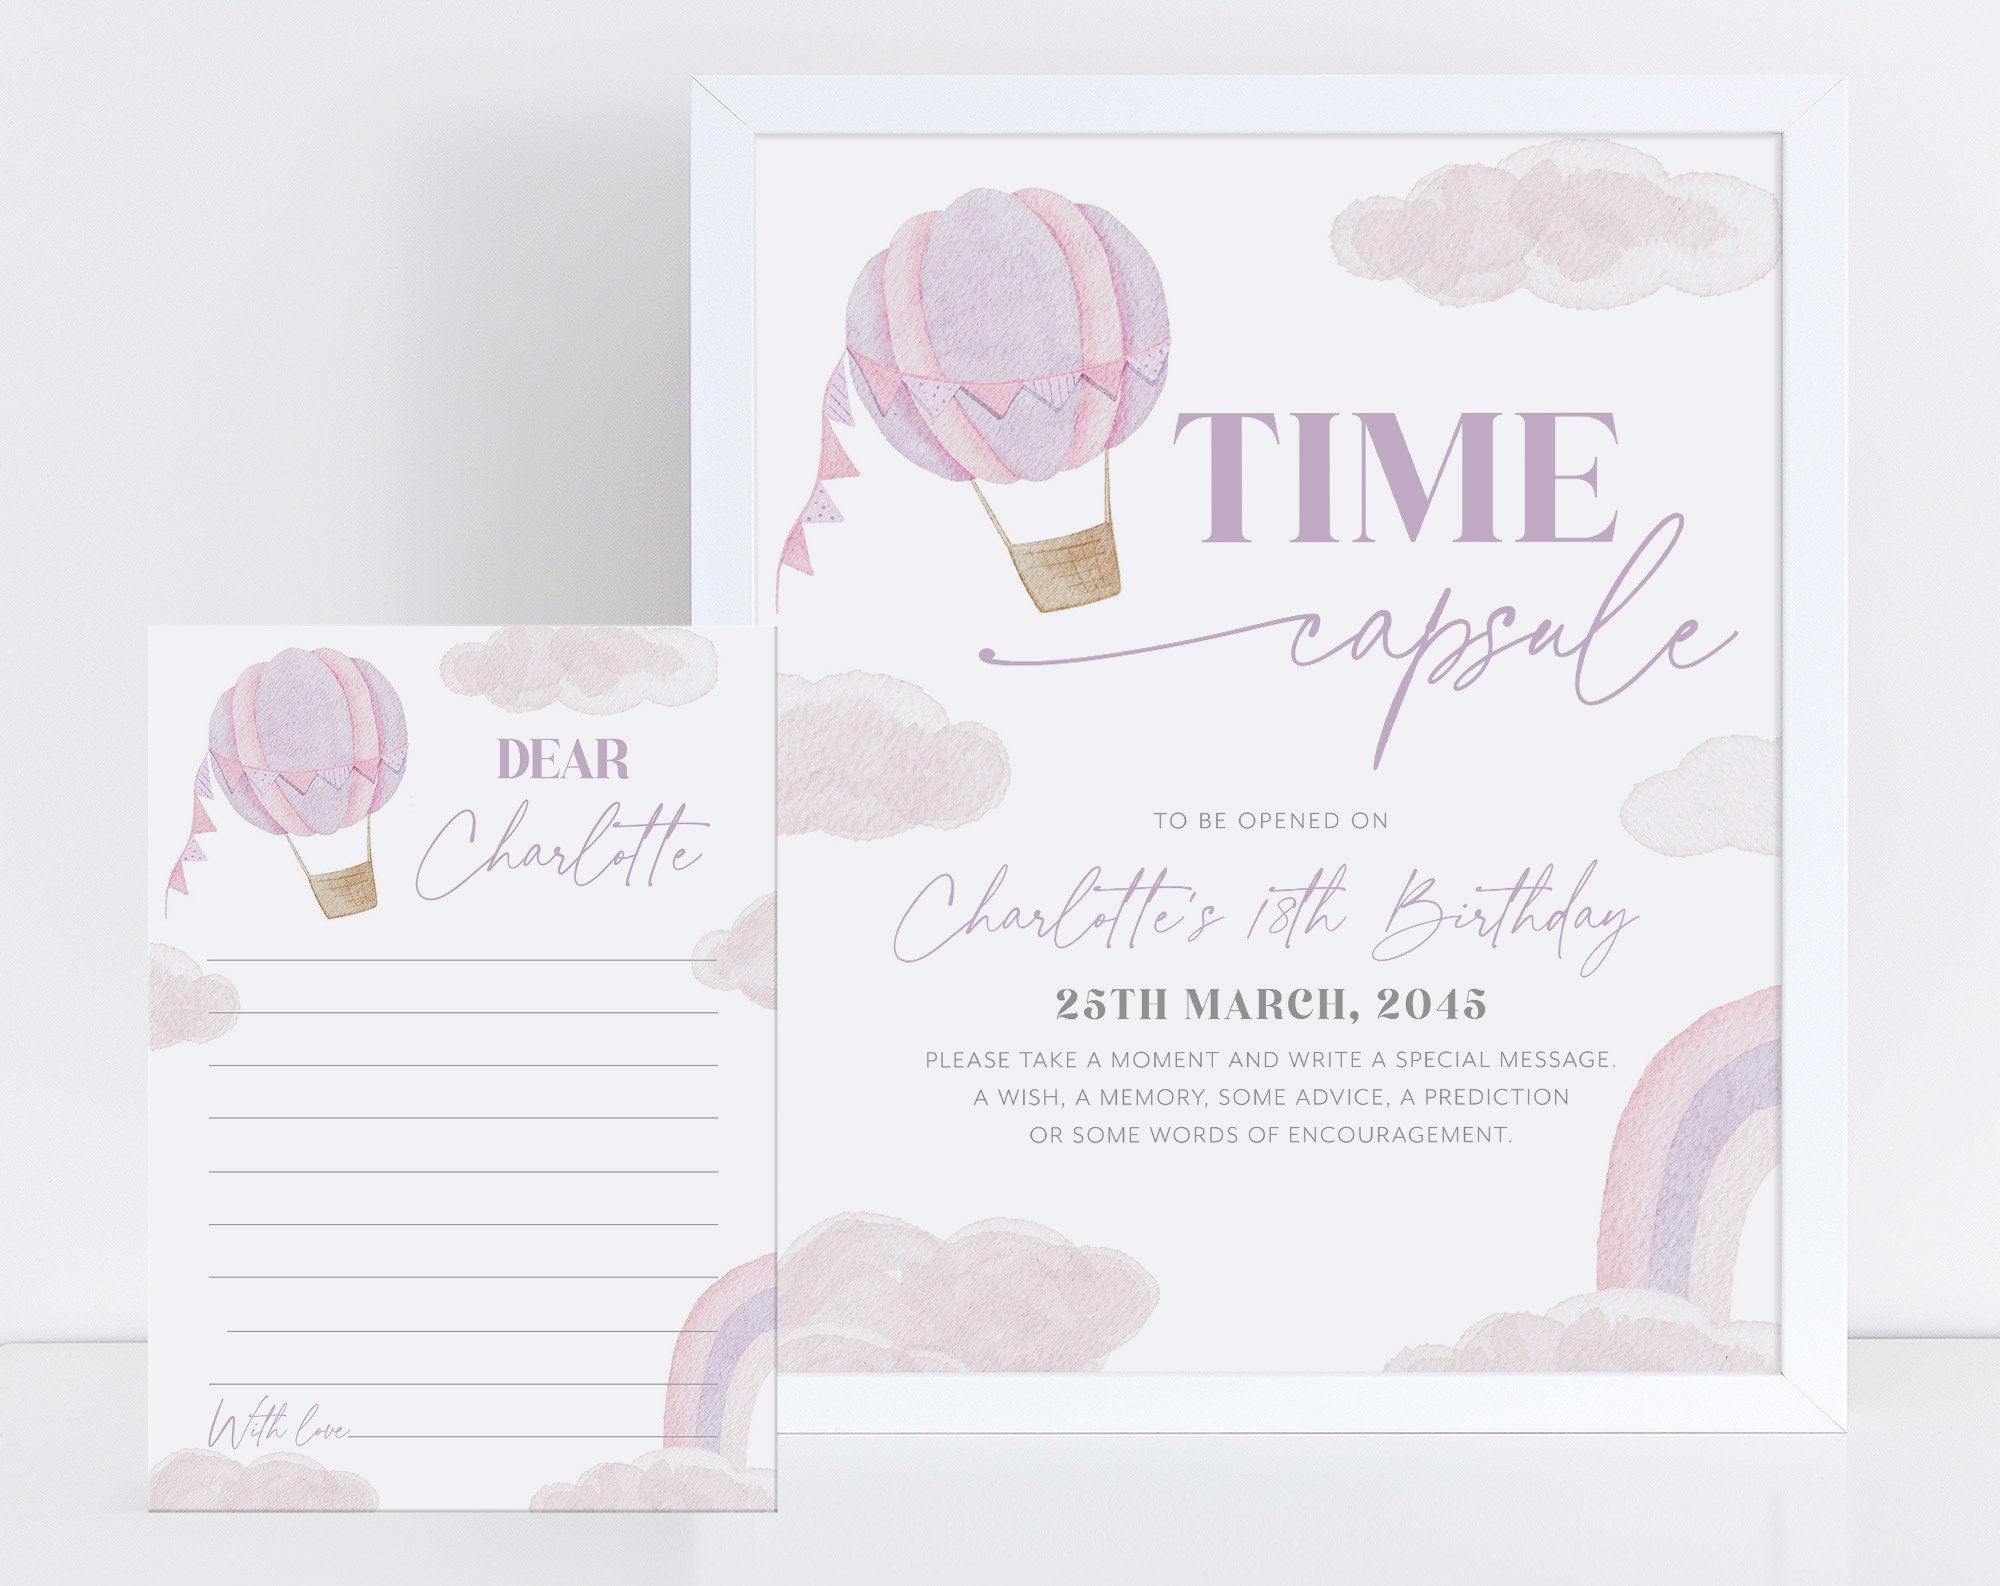 ONEderful Time Capsule, 1st Birthday Time Capsule Sign, Purple Hot Air Balloon Time Capsule Template, Girls 1st Birthday Onederful Rainbow